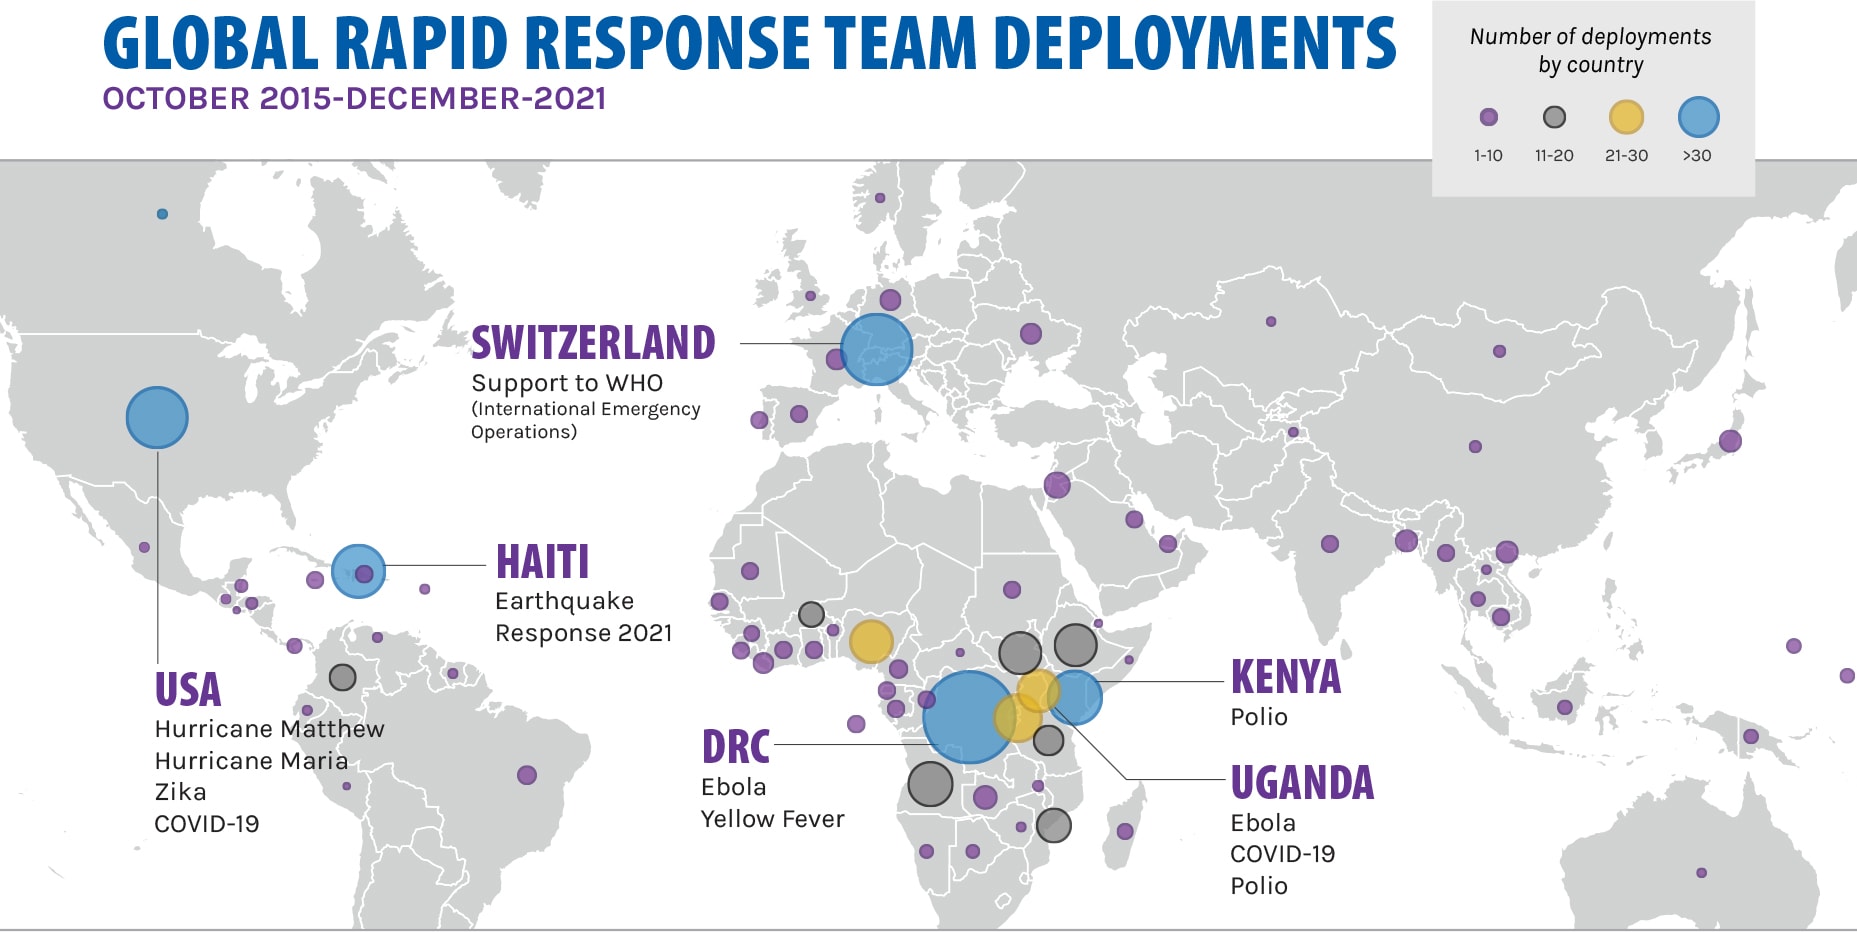 Global Rapid Response Team Deployments, October 2015-December 2021. World Map with deployments shown around the world.